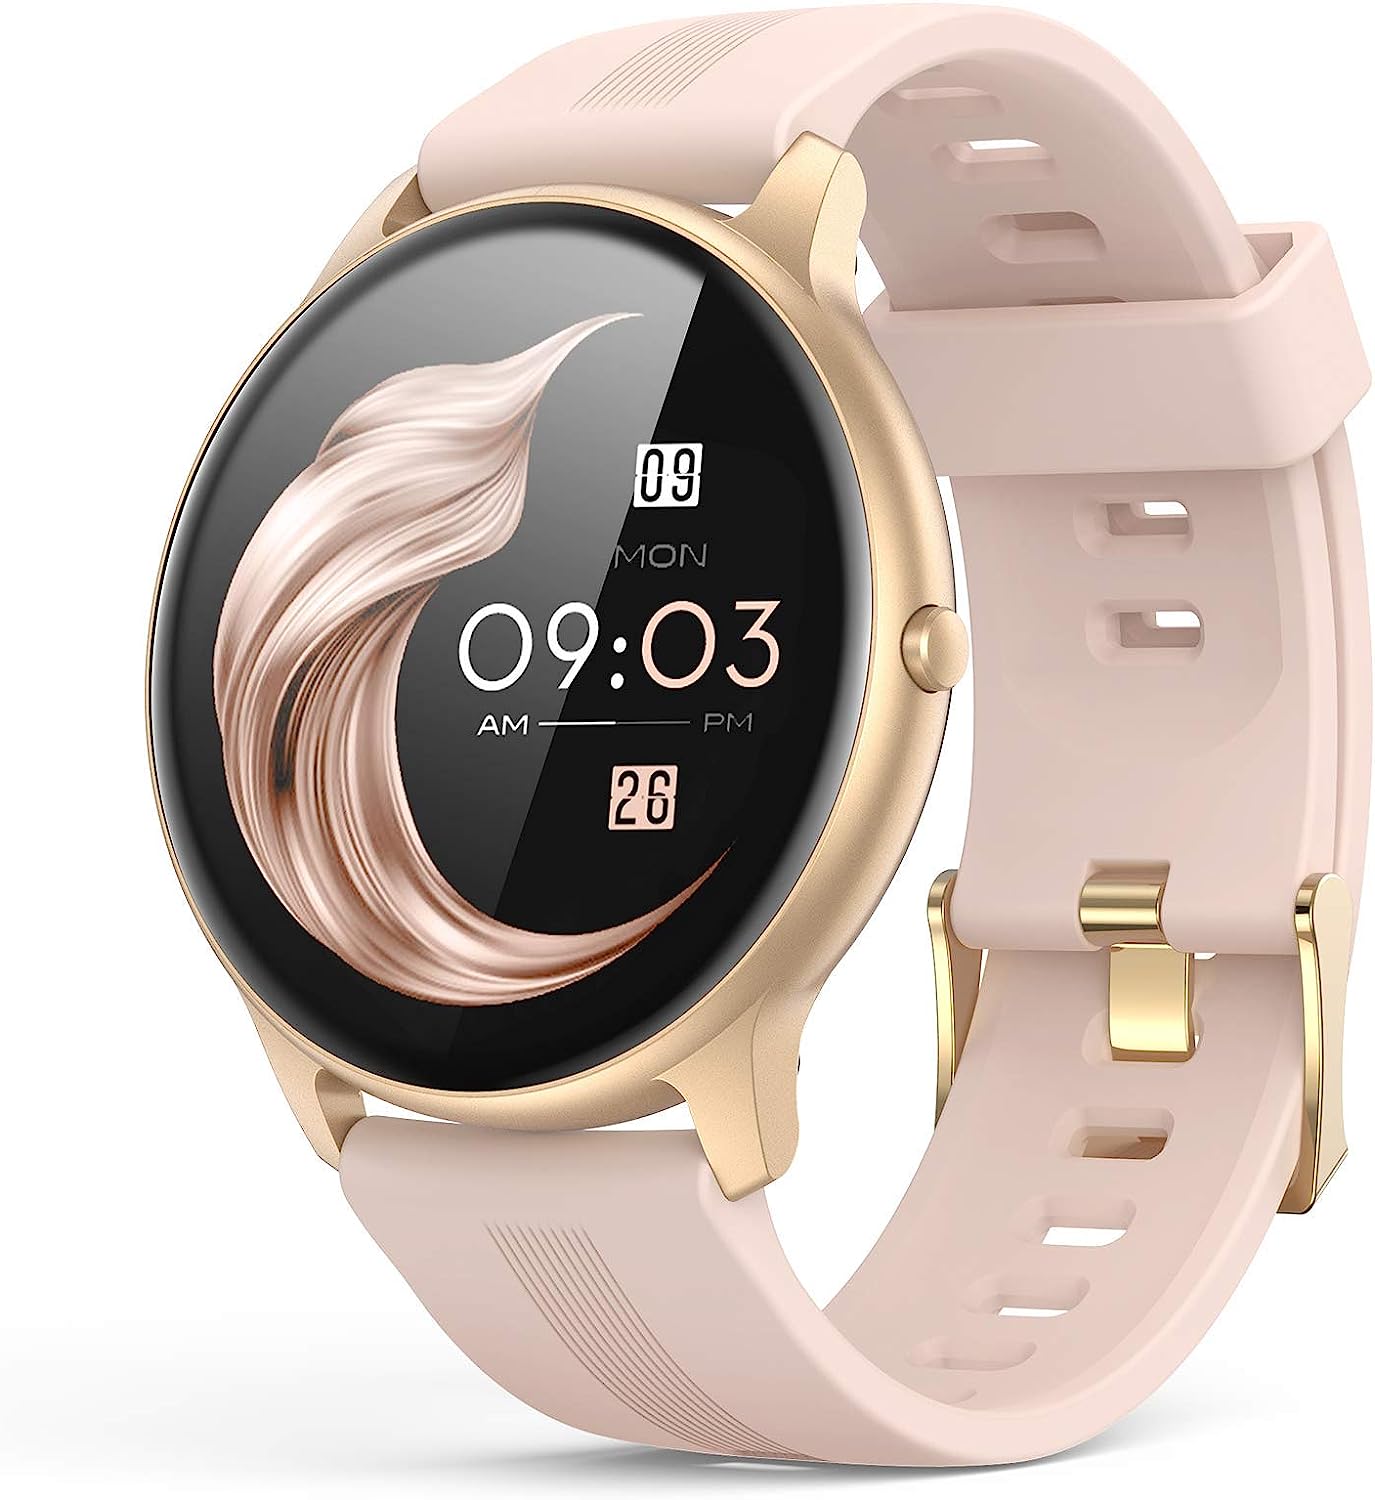 AGPTEK Smart Watch for Women, Smartwatch for Android [...]